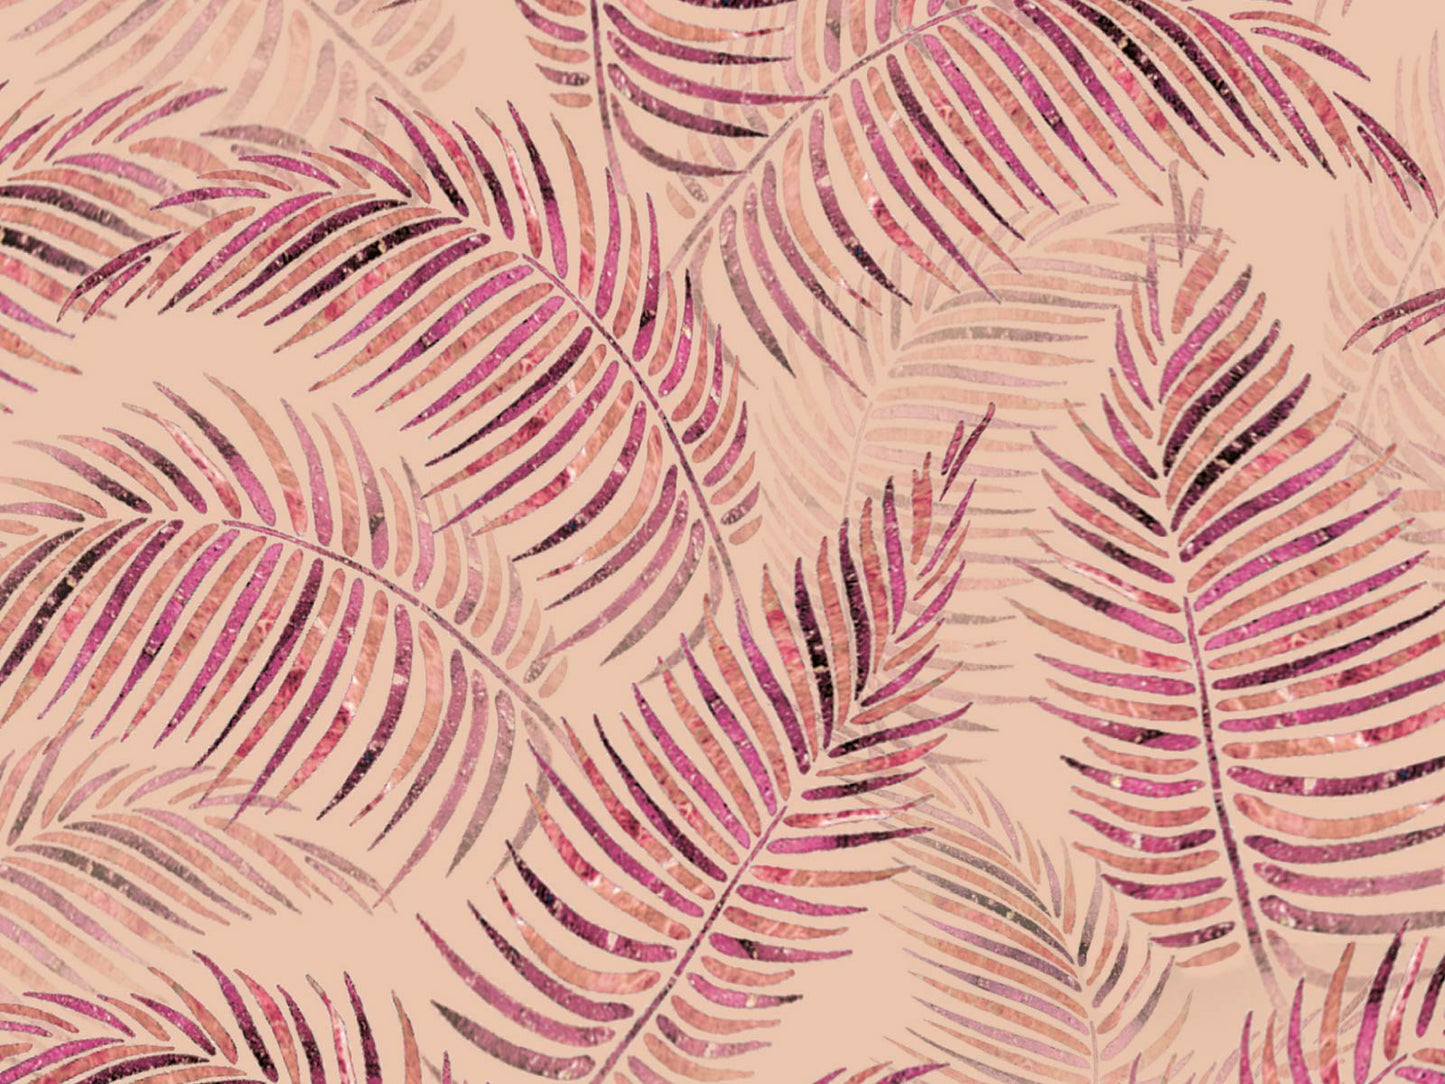 Mineral Palm - Pink